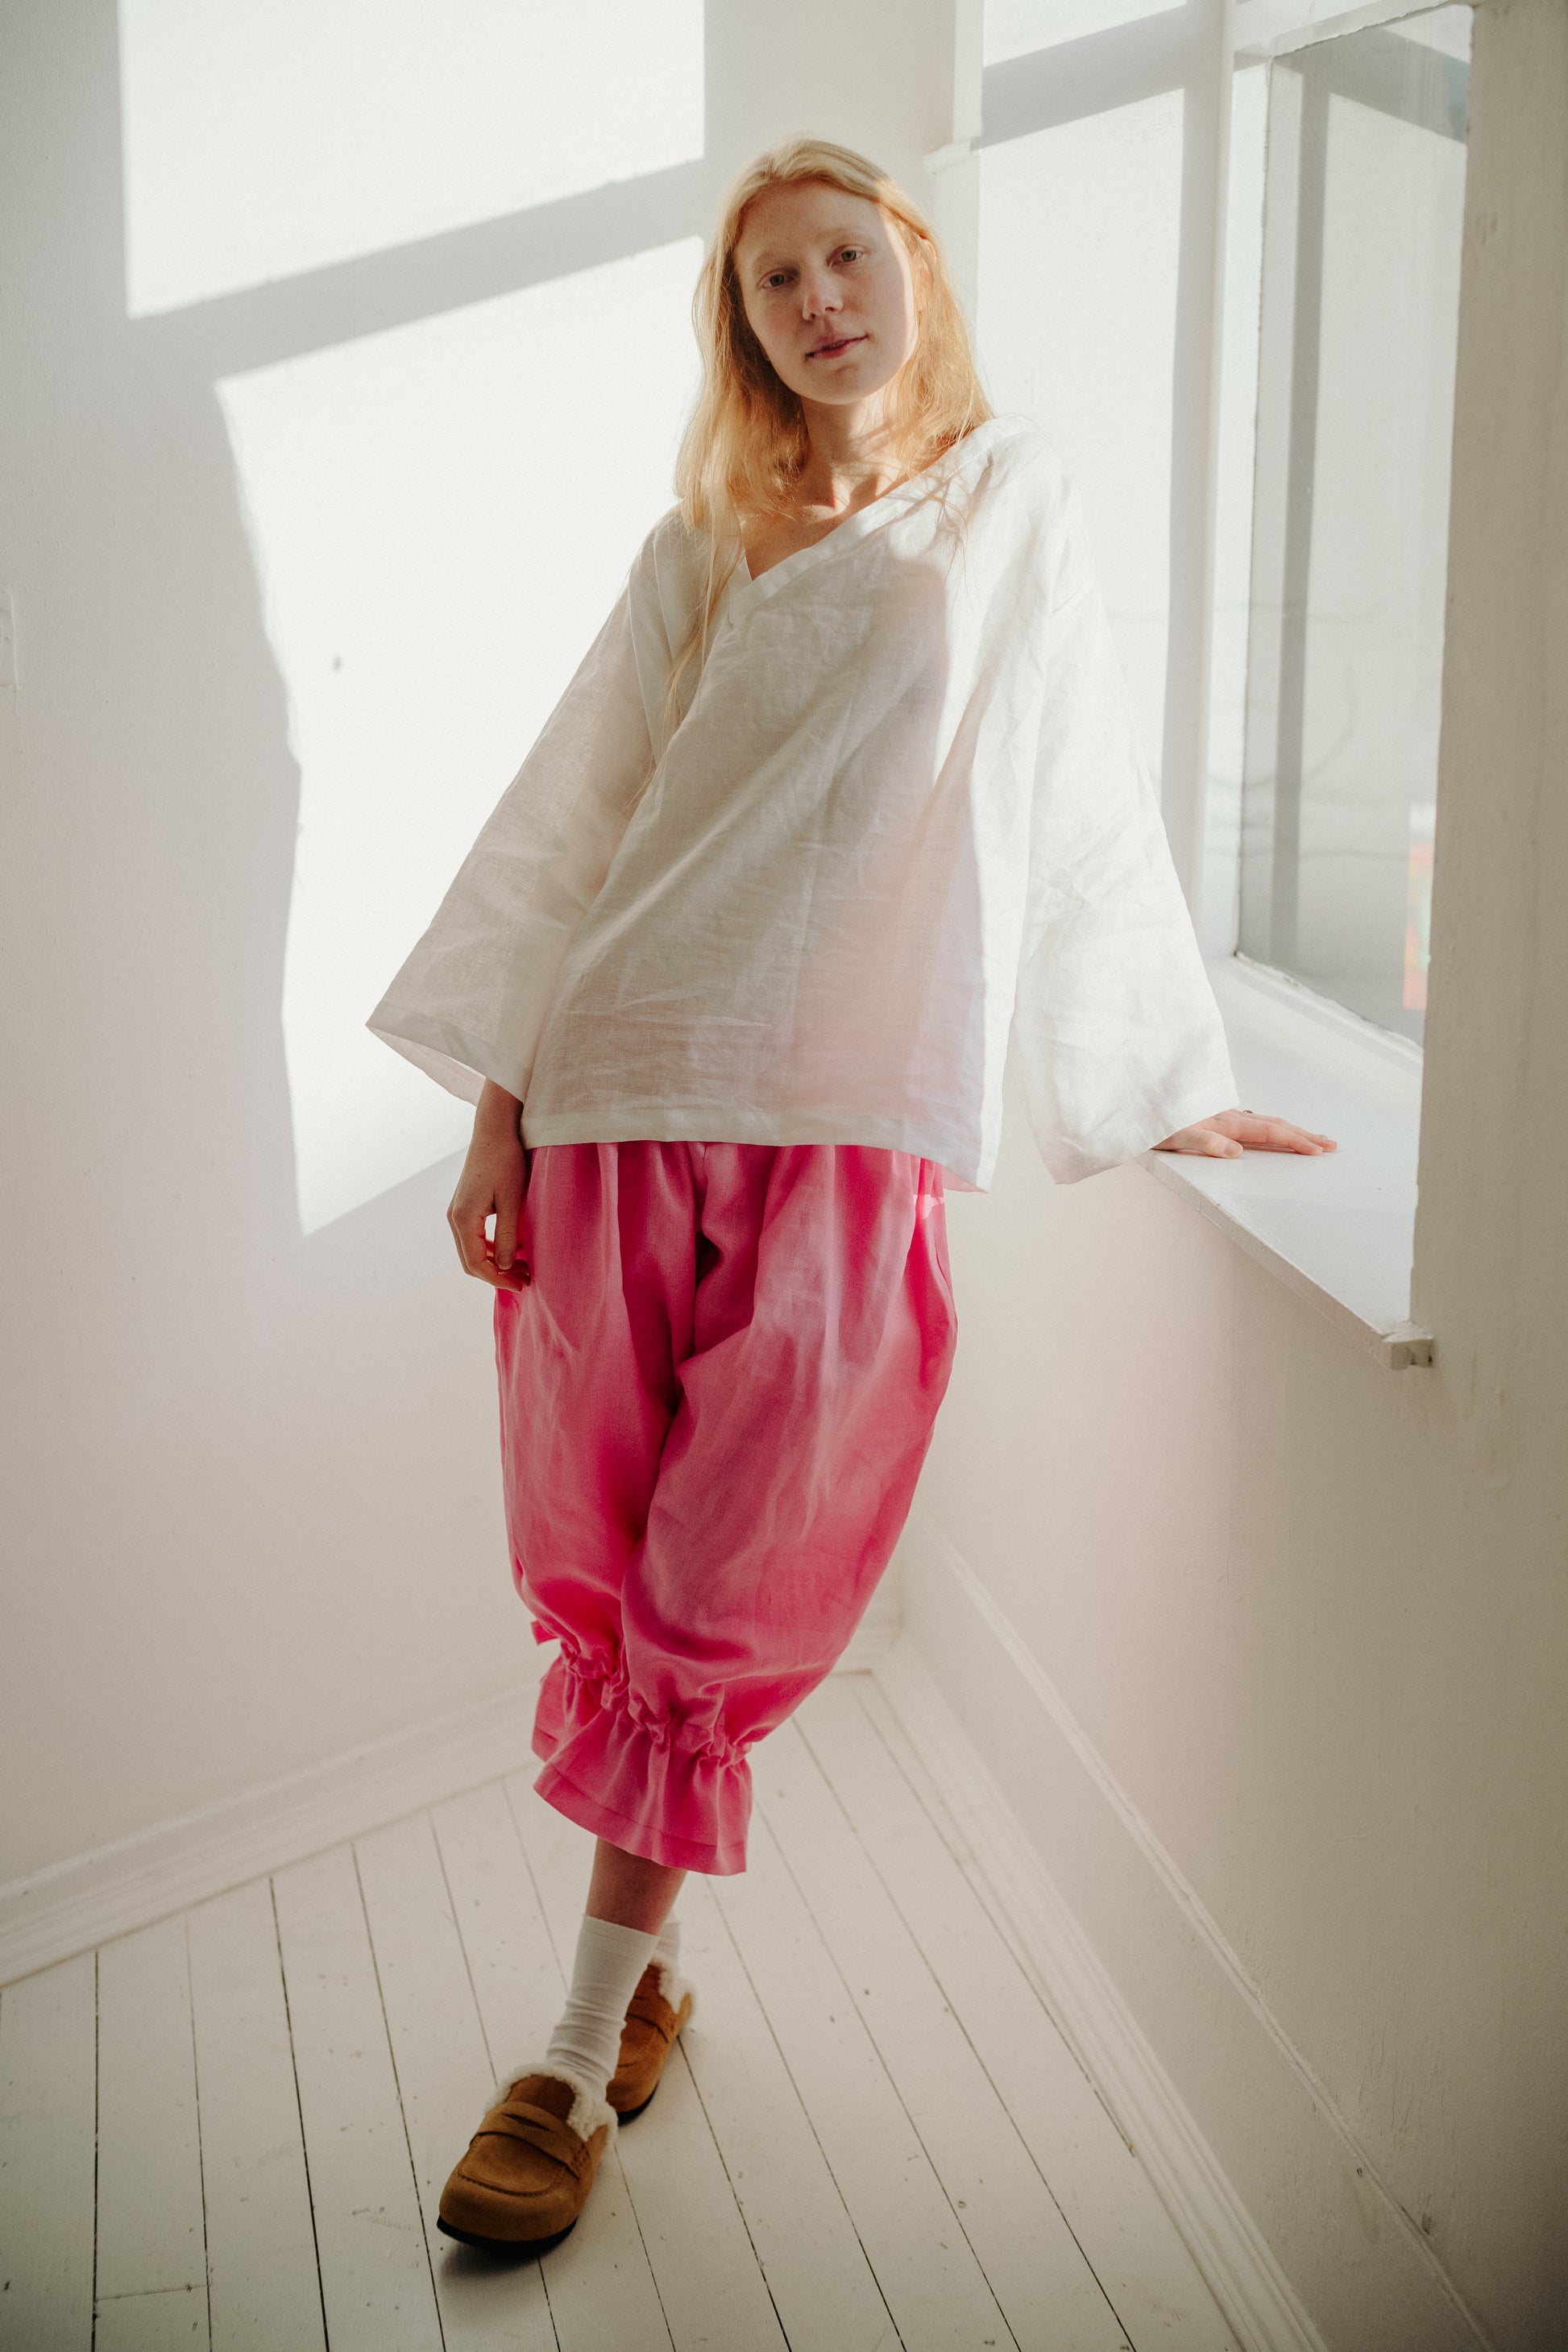 CANDY BLOOMERS | Our best selling bloomers in candy. They are fun and very wearable. An oversized ‘jogger’ style with elasticated waist, they feature bow fastenings at the bottom which can be tightened to create a frill at the ankle. They can also be worn